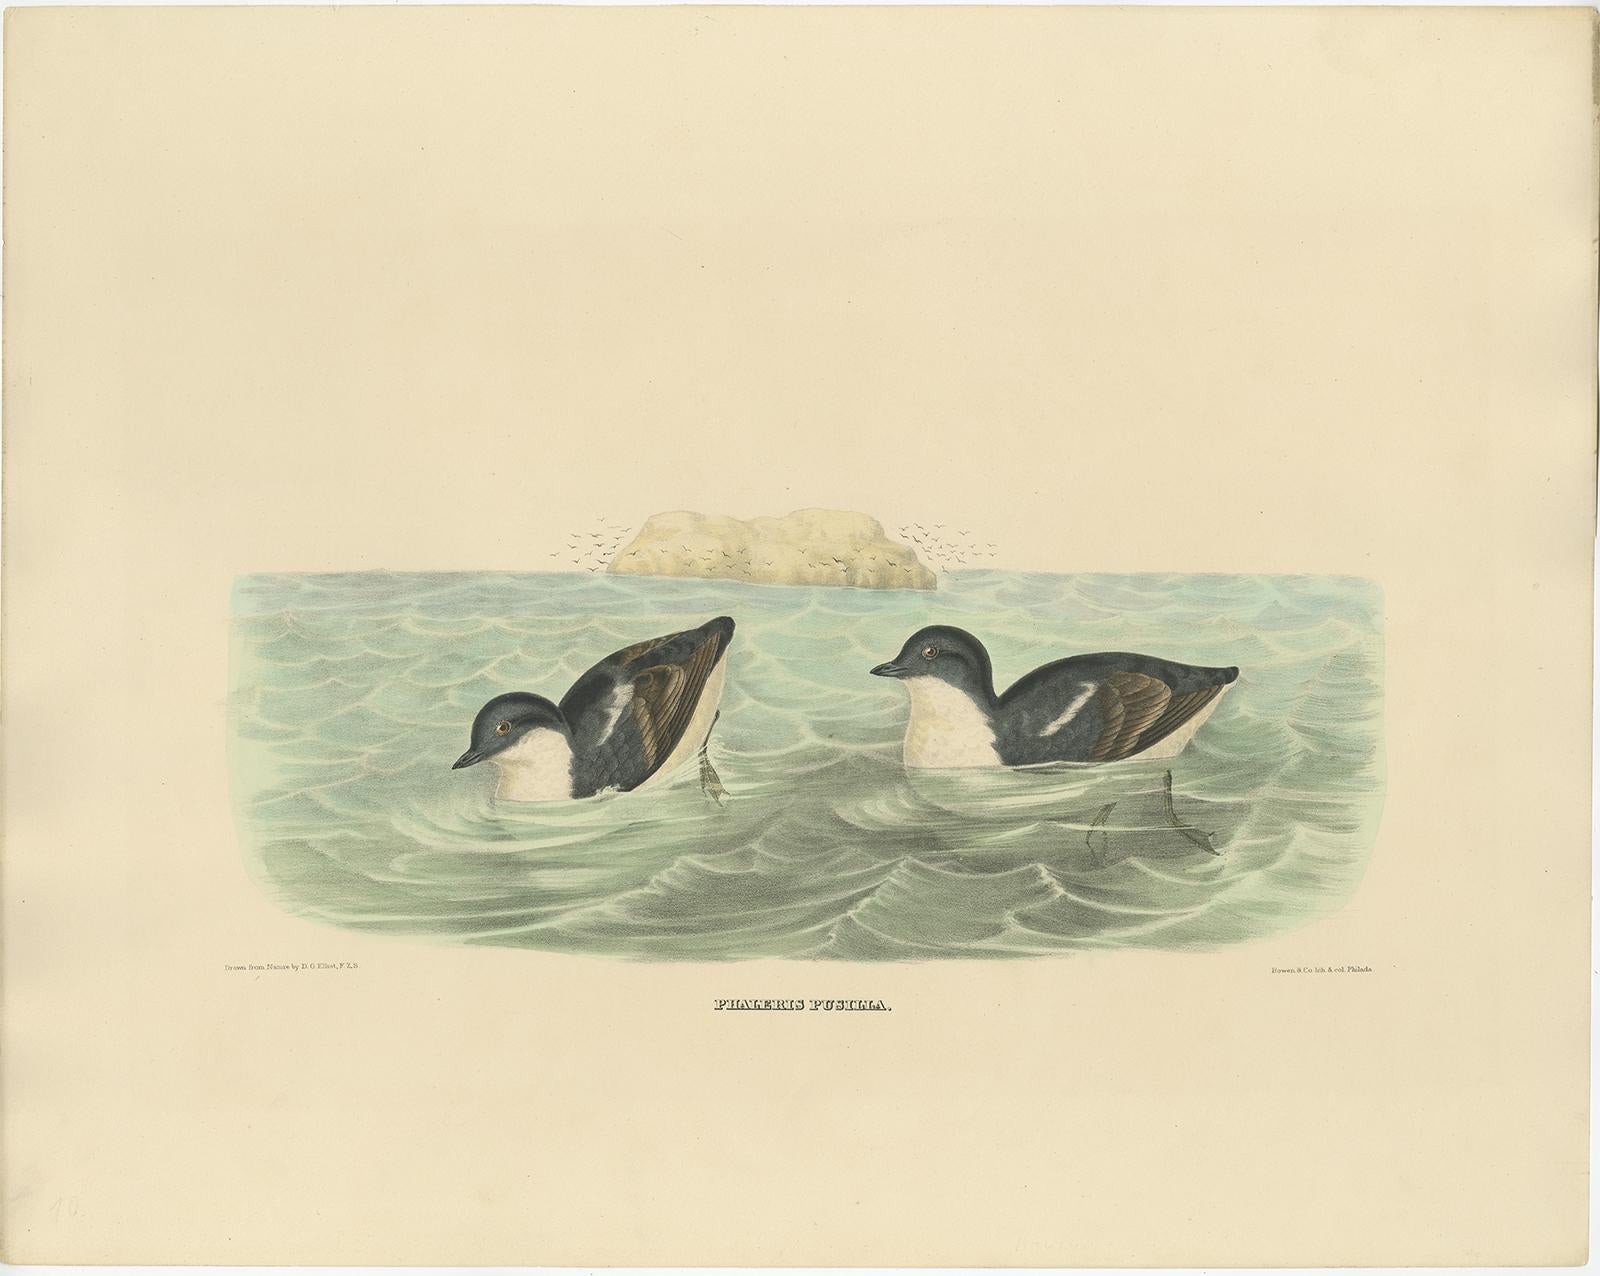 Antique bird print titled 'Phaleris Pusilla'. Old bird print depicting the Least Auk. This print originates from 'The new and heretofore unfigured species of the birds of North America', published 1866-1869.

This spectacular large folio lithograph